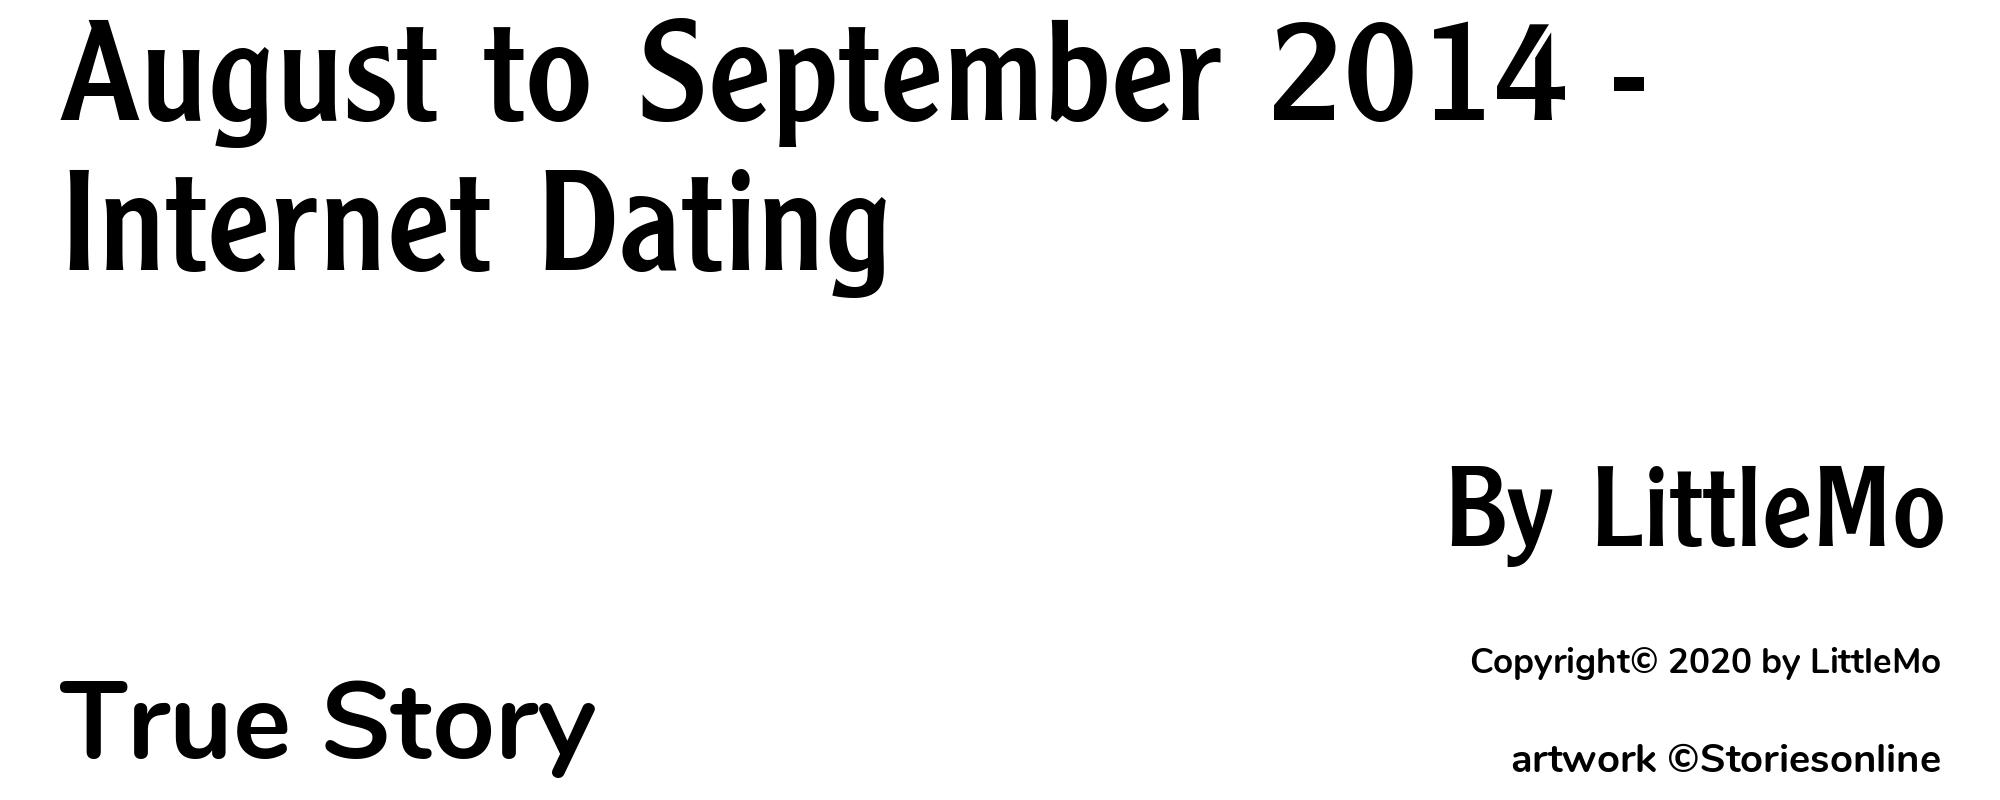 August to September 2014 - Internet Dating - Cover